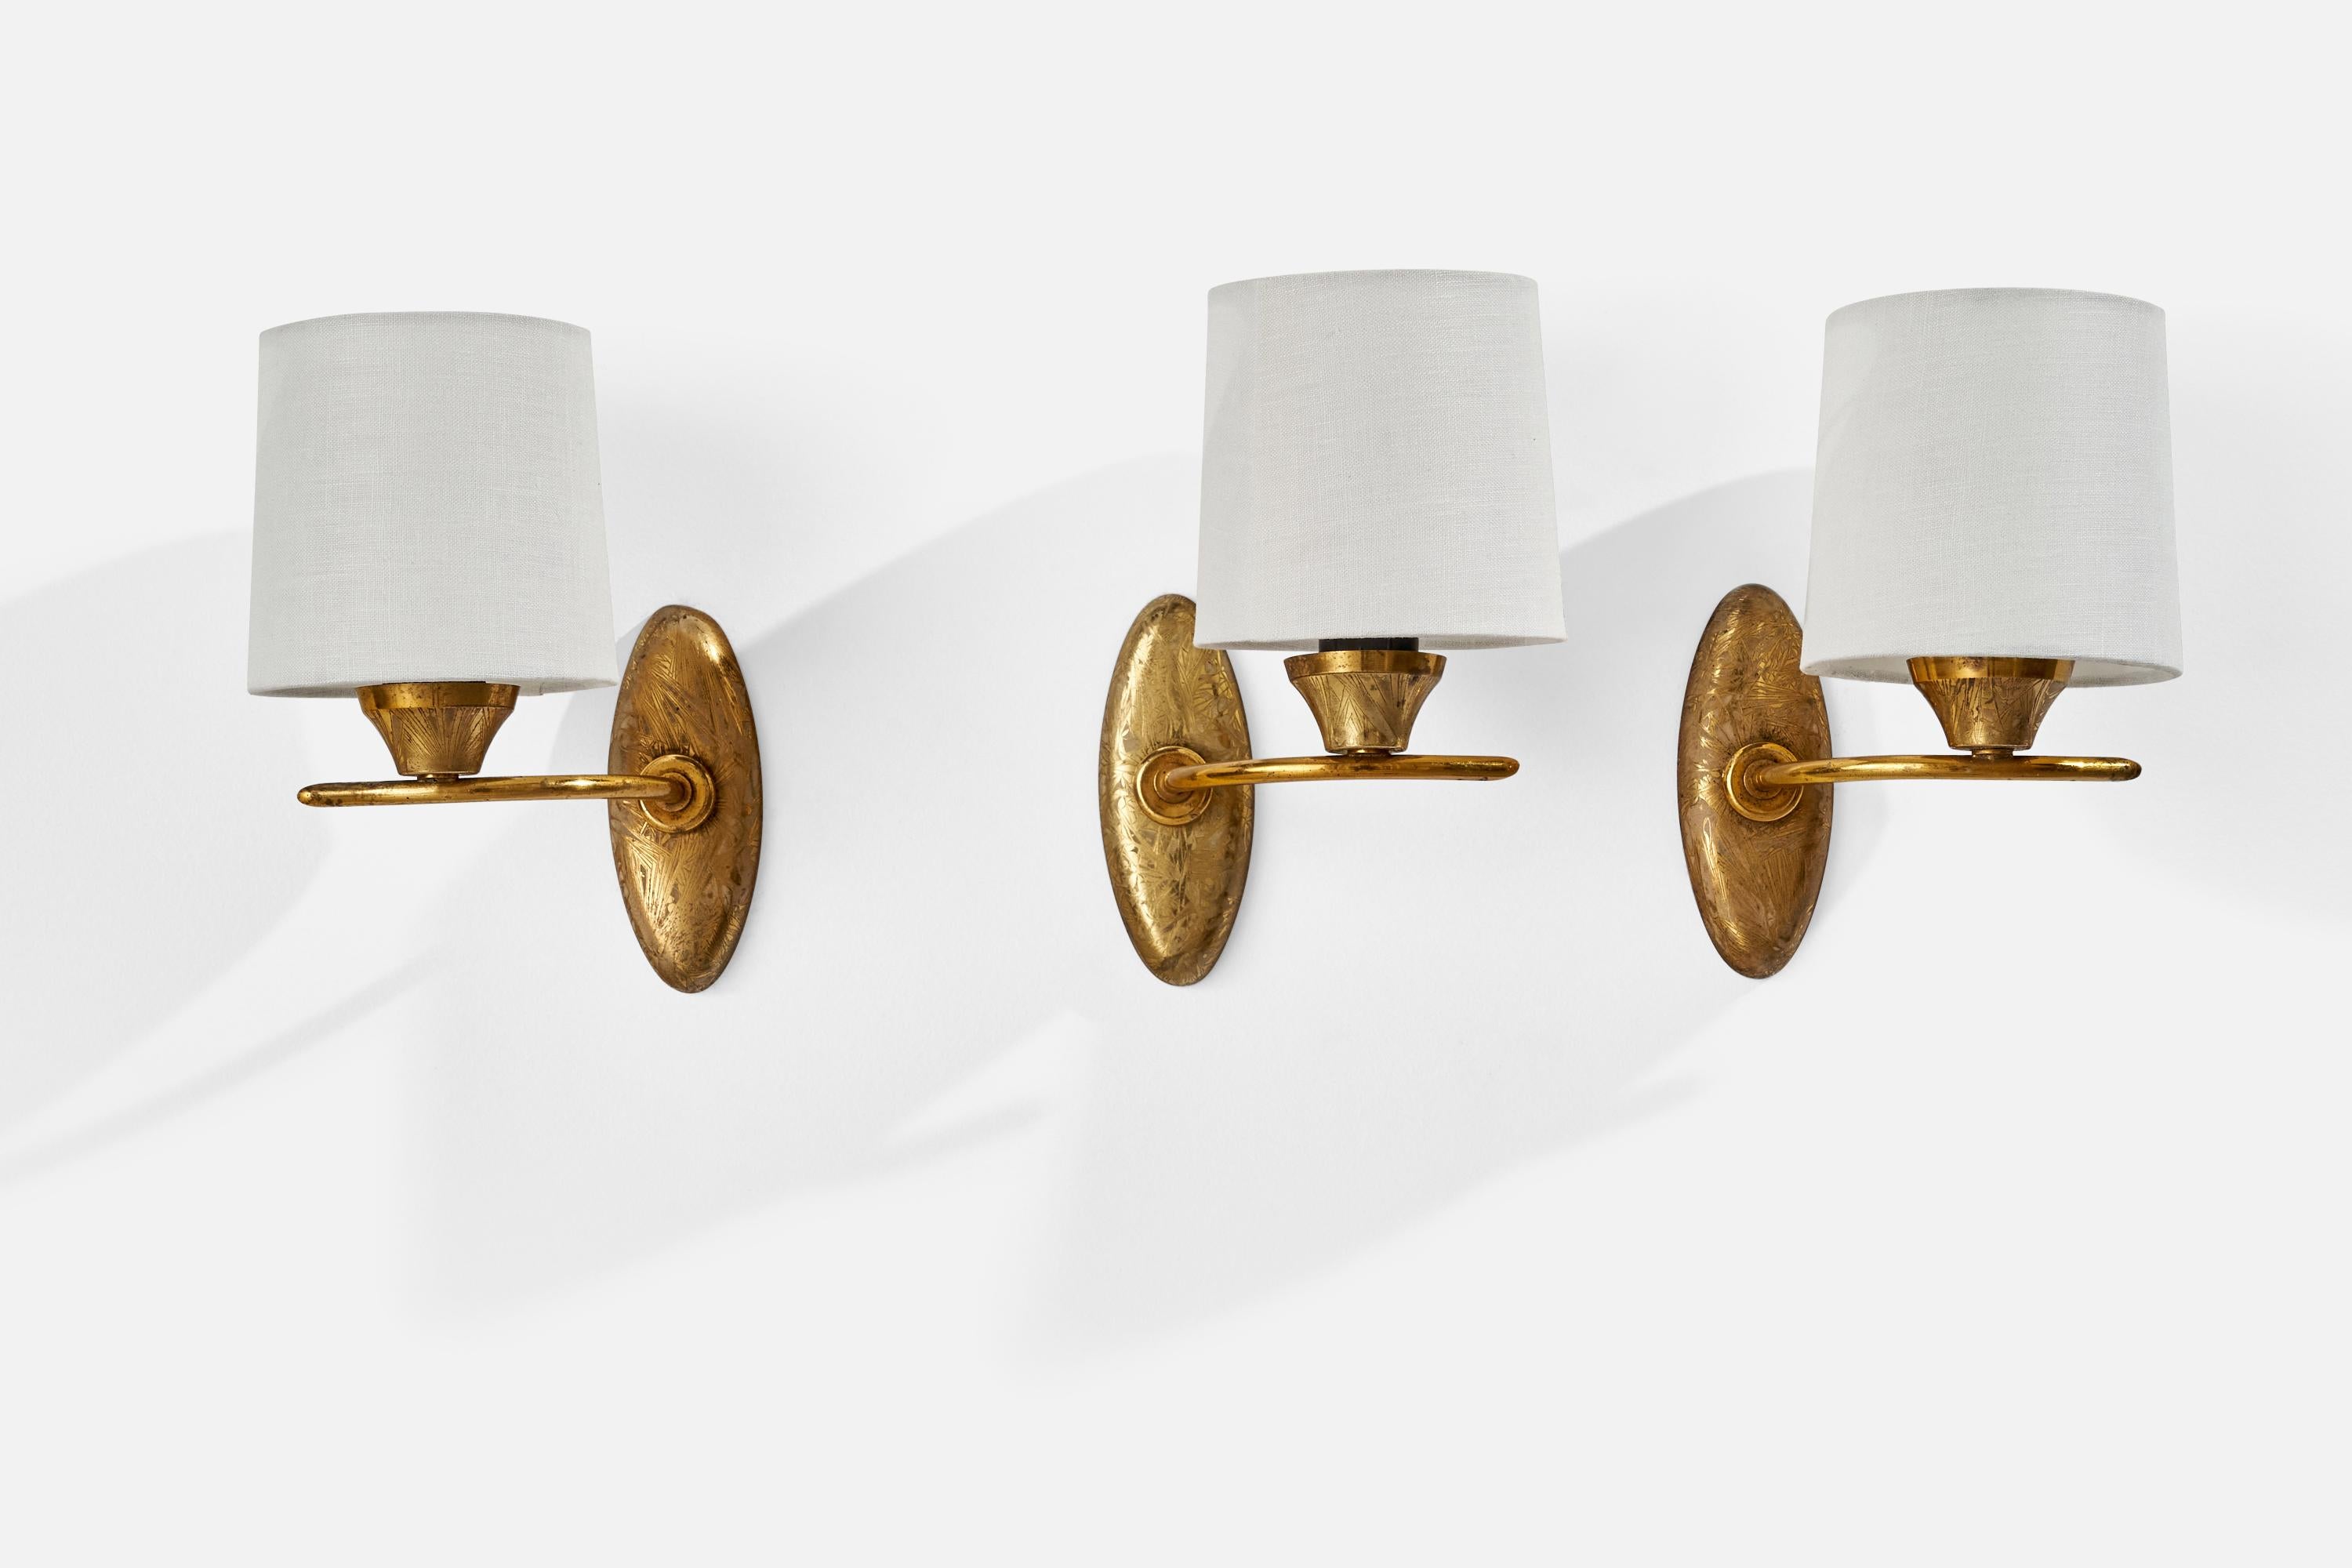 A set of 3 impressed brass and white fabric wall lights designed and produced in France, c. 1950s.

Overall Dimensions (inches): 8.75” H x 4.57” W x 5.43” D
Back Plate Dimensions (inches): 5.12” H x 1.96” W x 0.50” D
Bulb Specifications: E-12